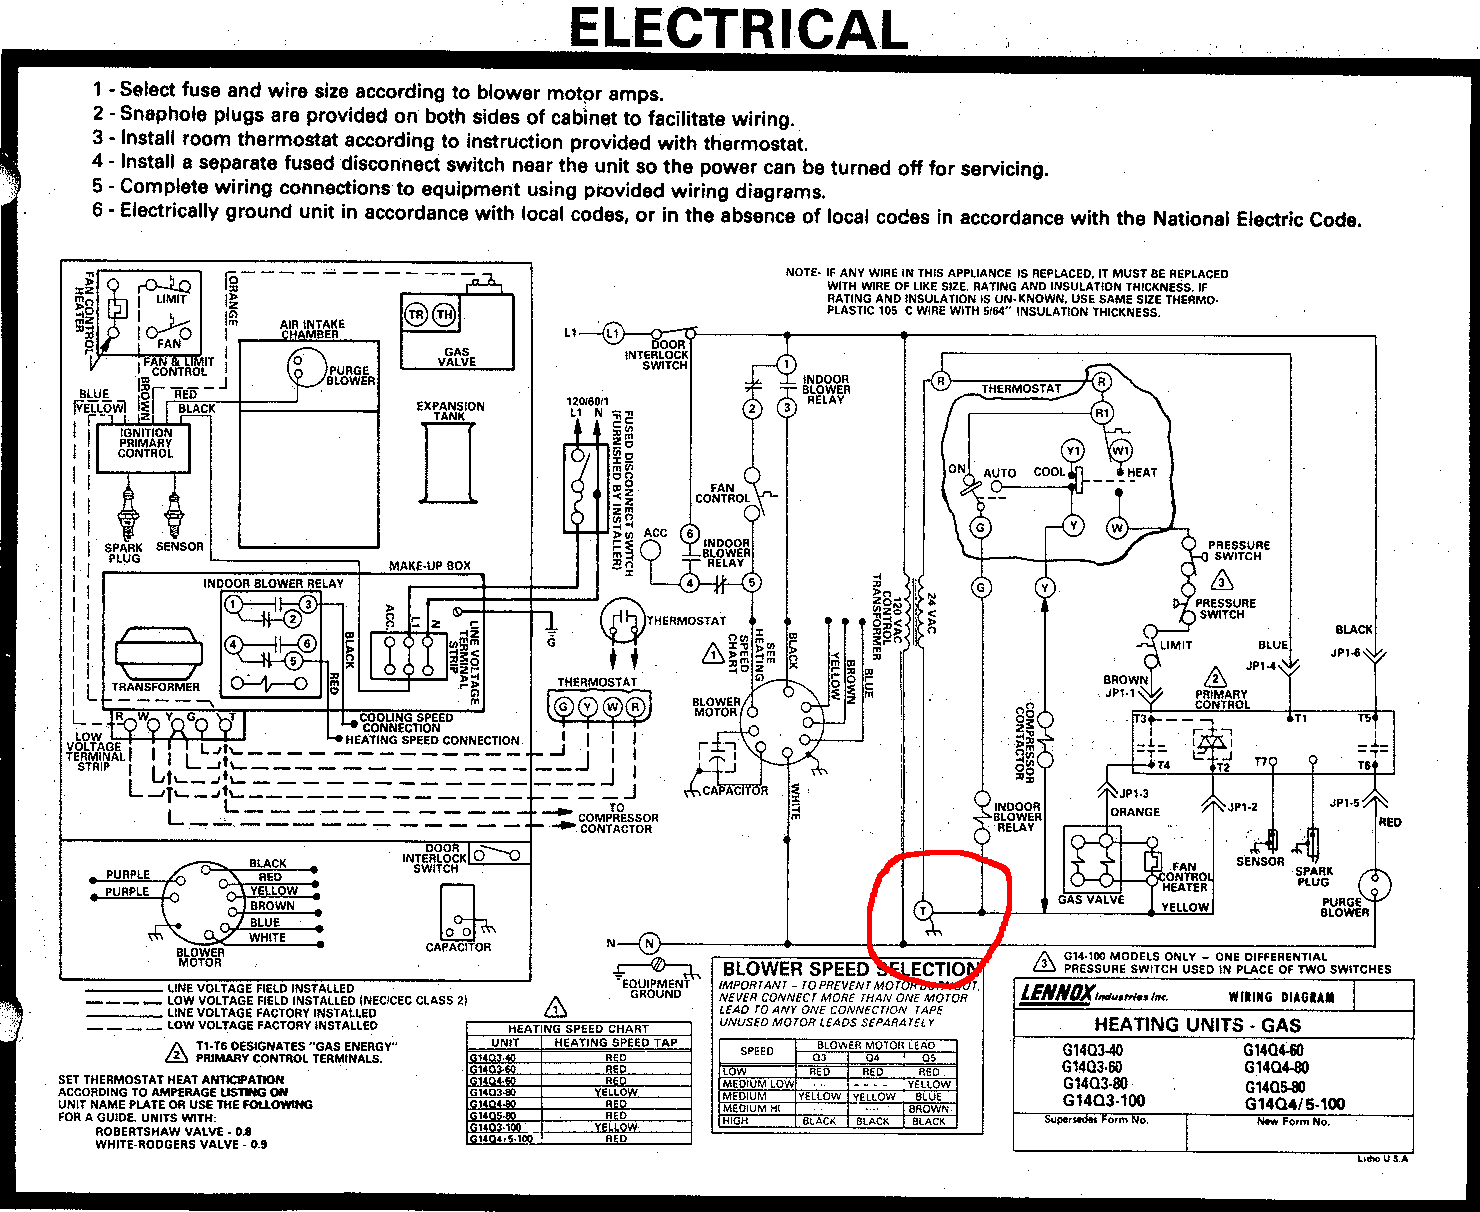 Nest Wiring Diagram Furnace Thermostat Wiring Colors Wiring Diagram Speed